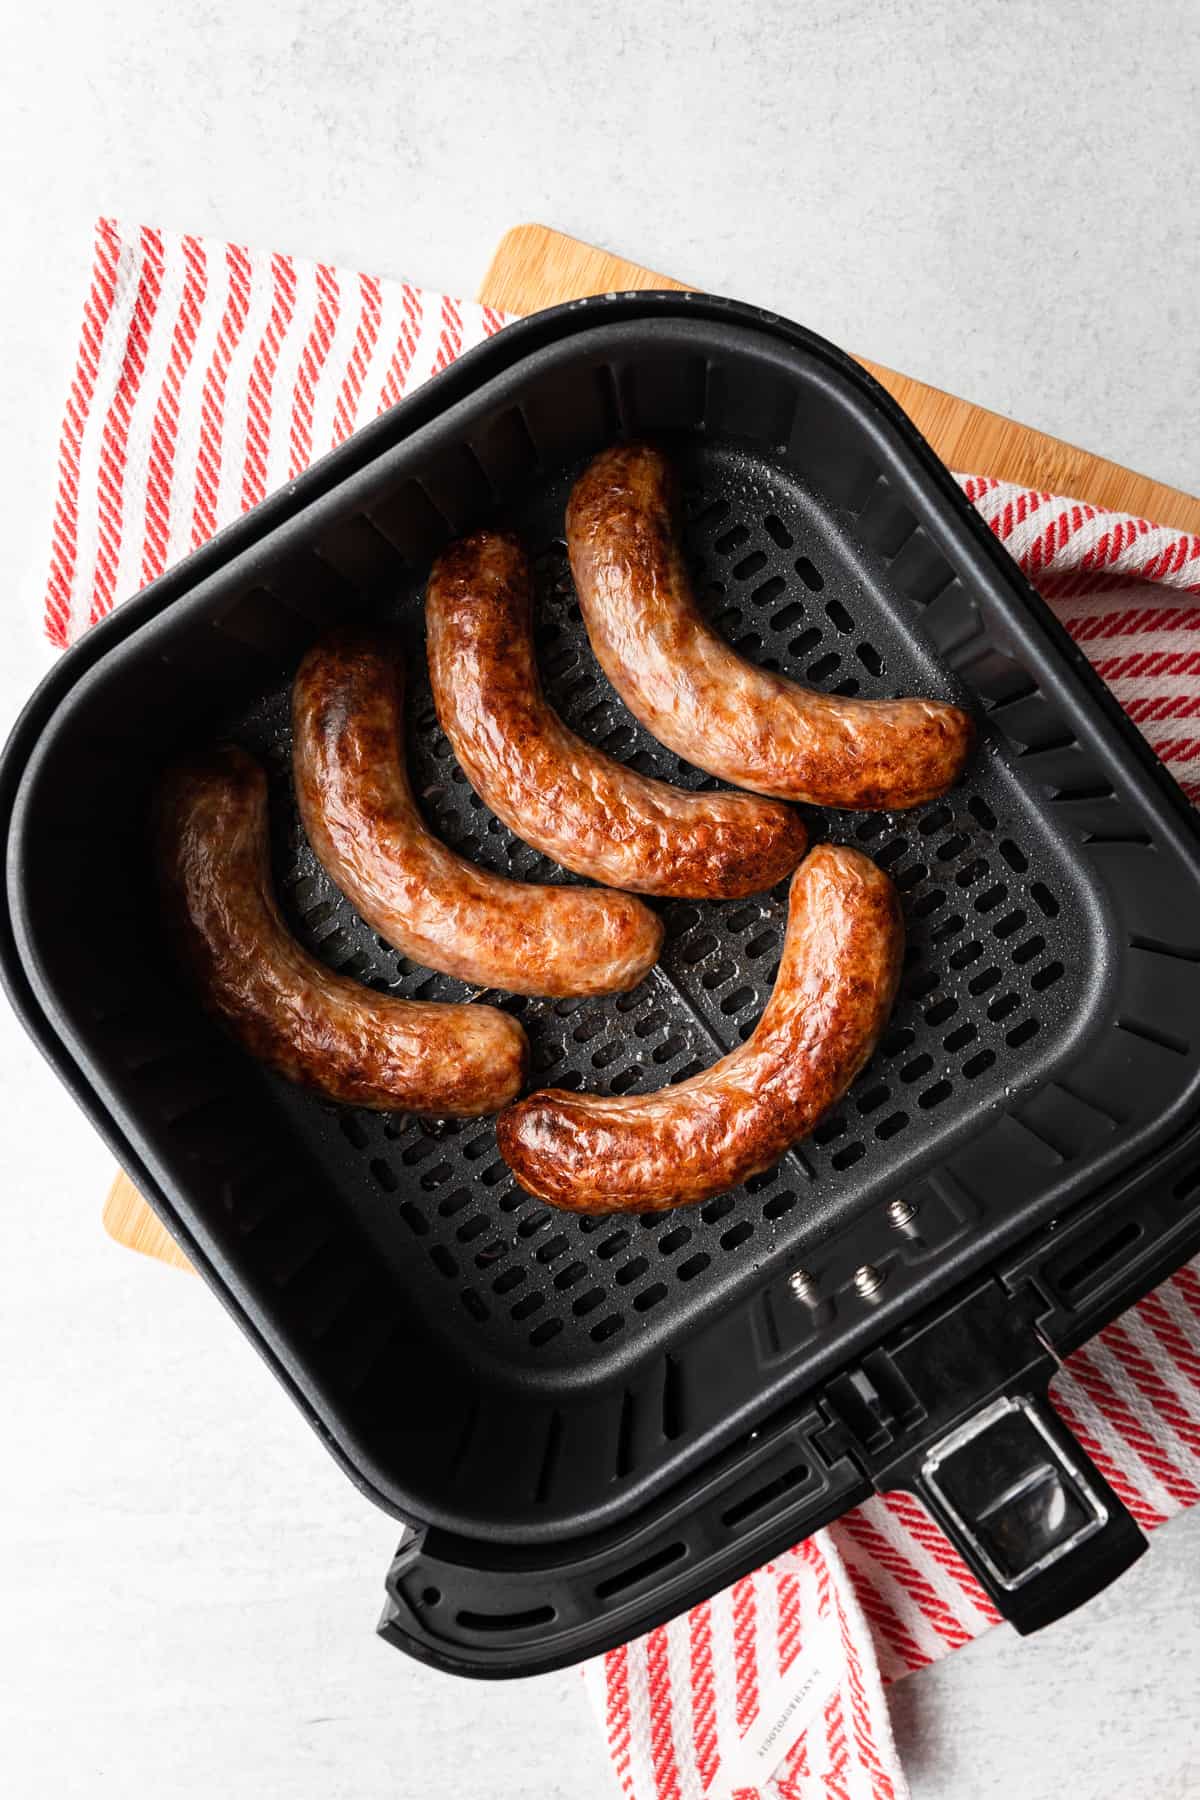 cooked brats in an sir fryer basket